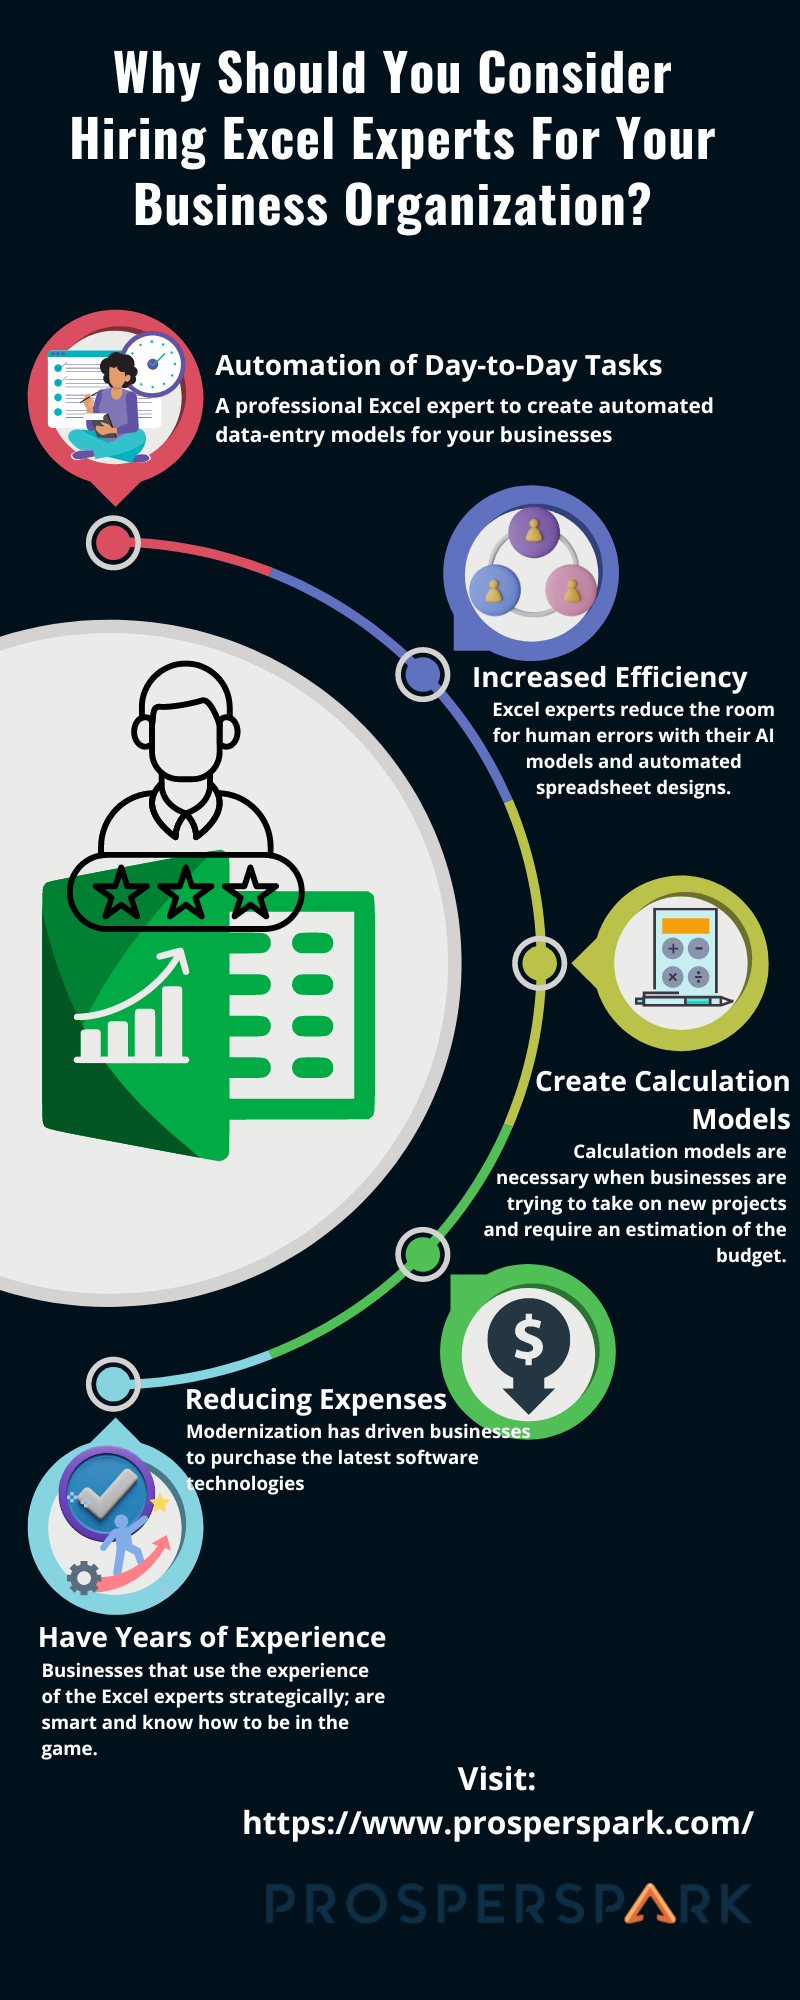 Why Should You Consider Hiring Excel Experts For Your Business Organization?